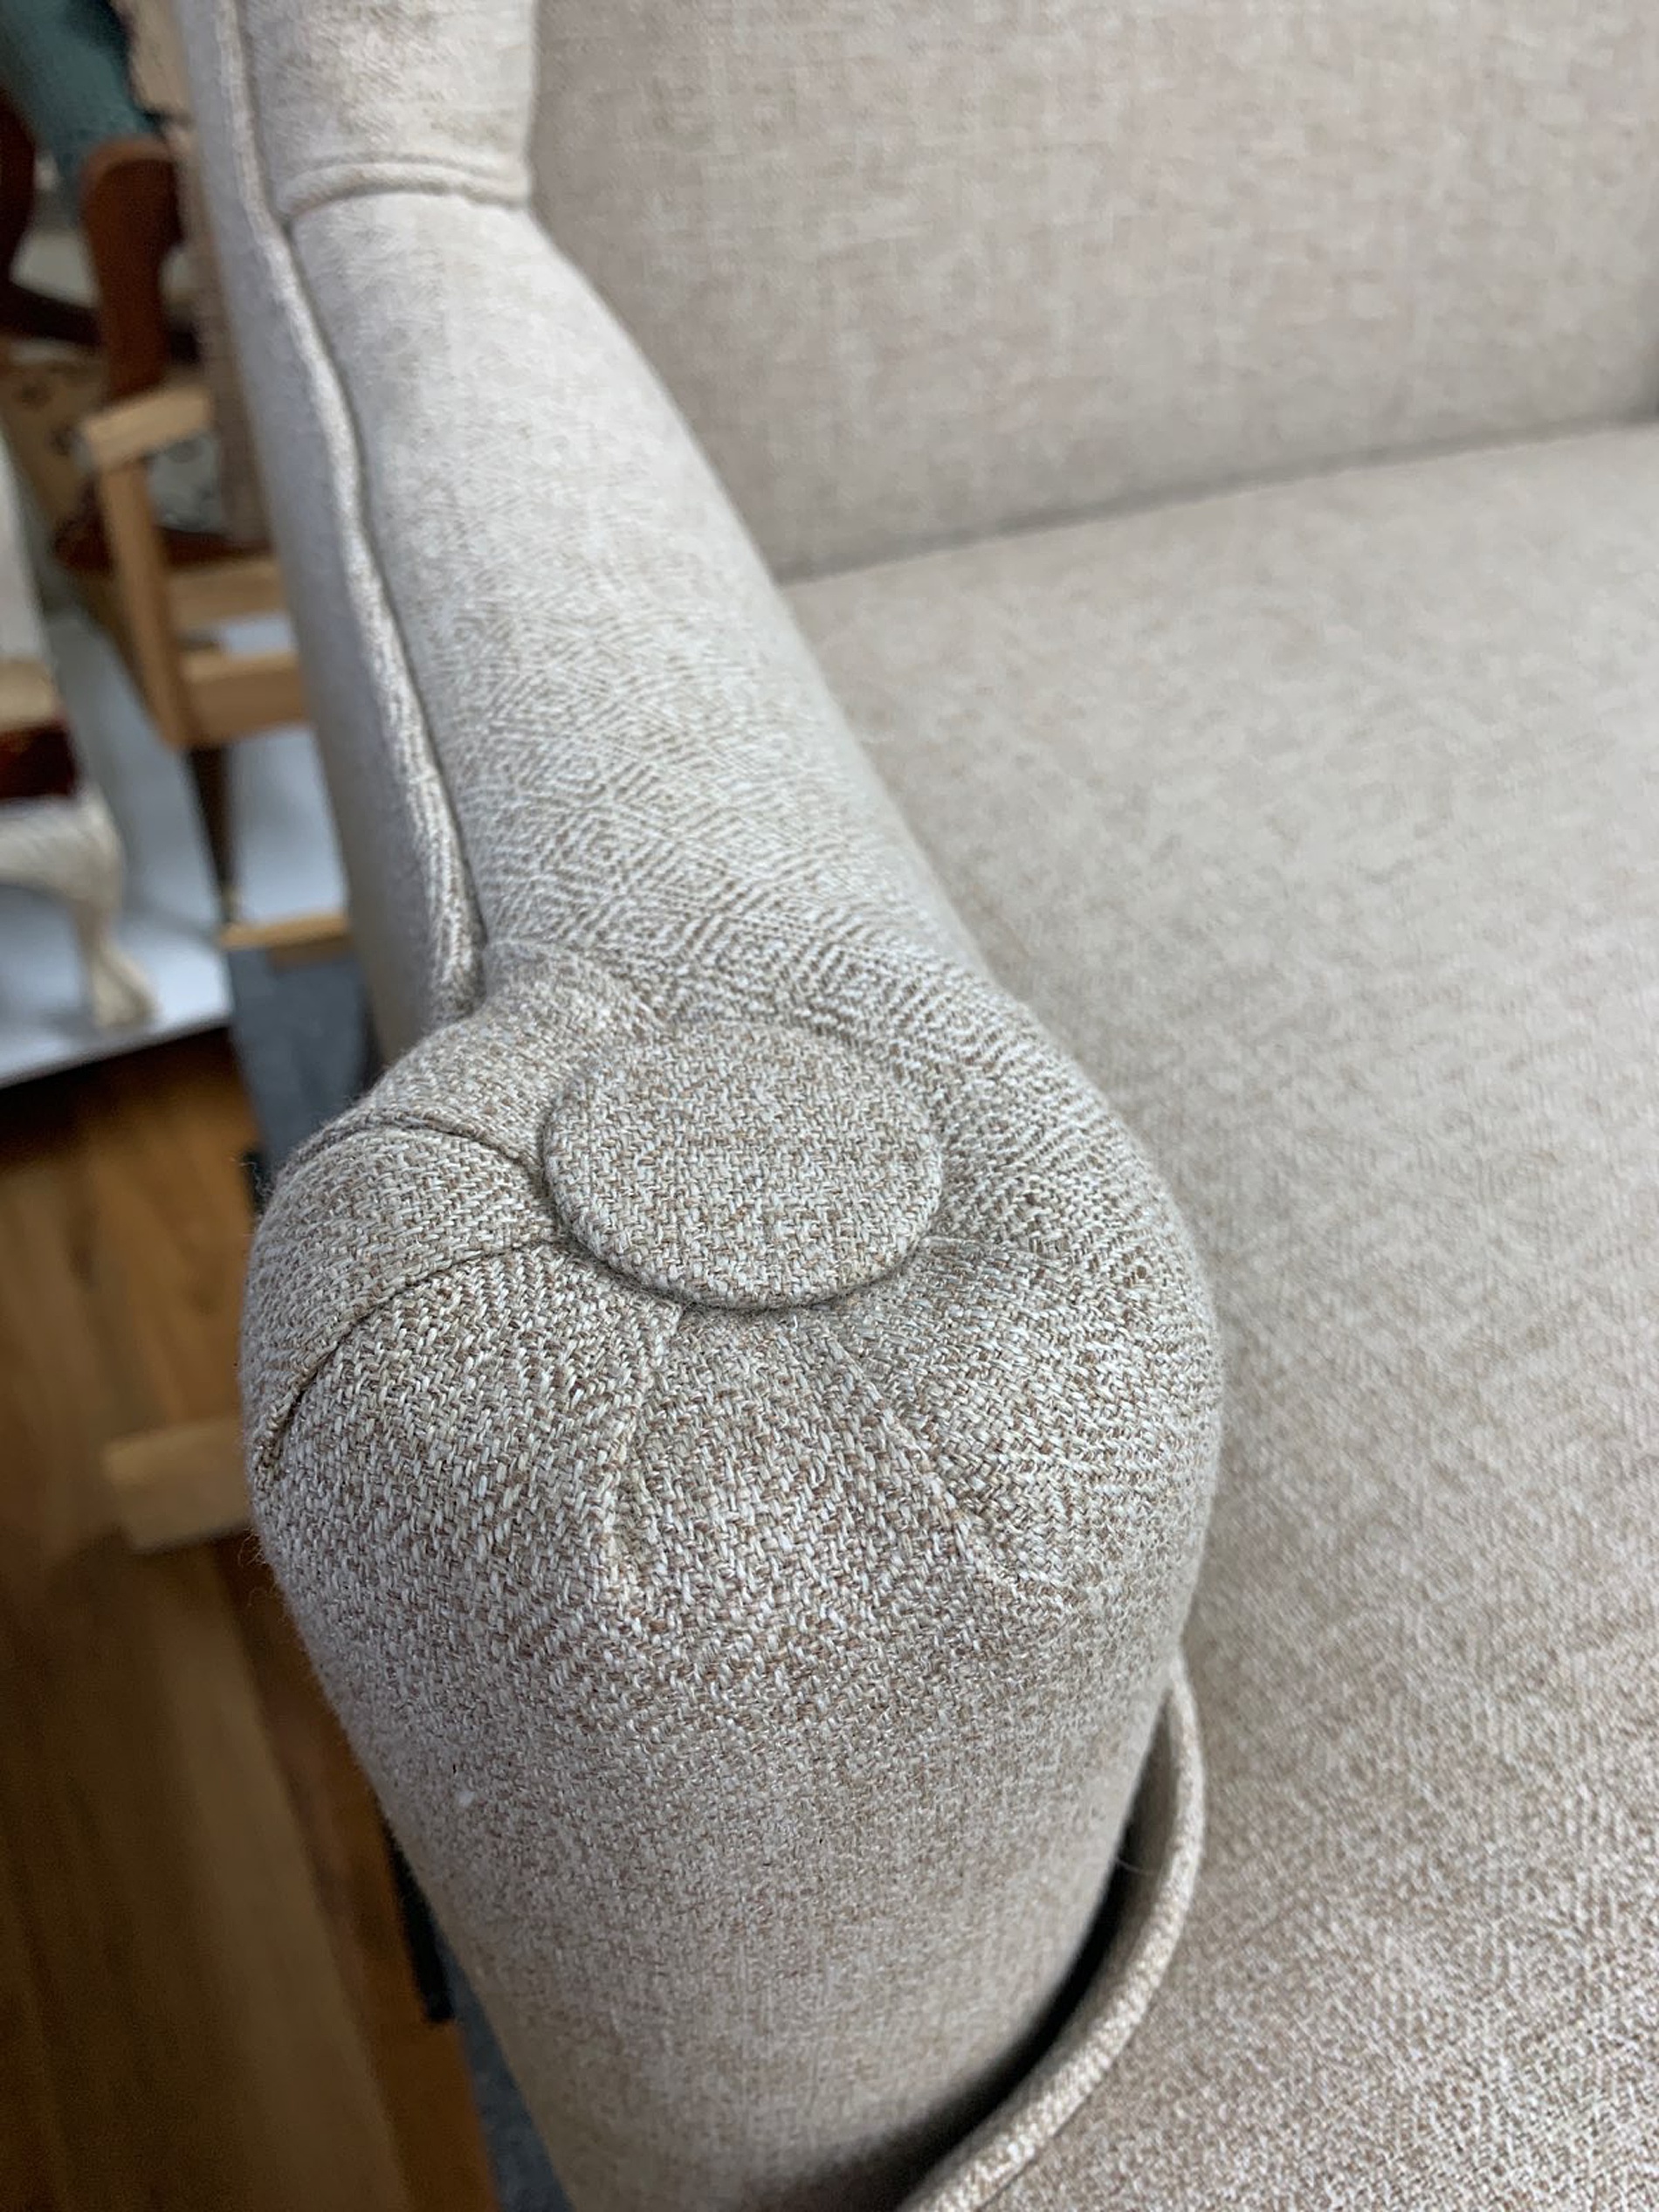 decorative buttons and details on reupholstered chair